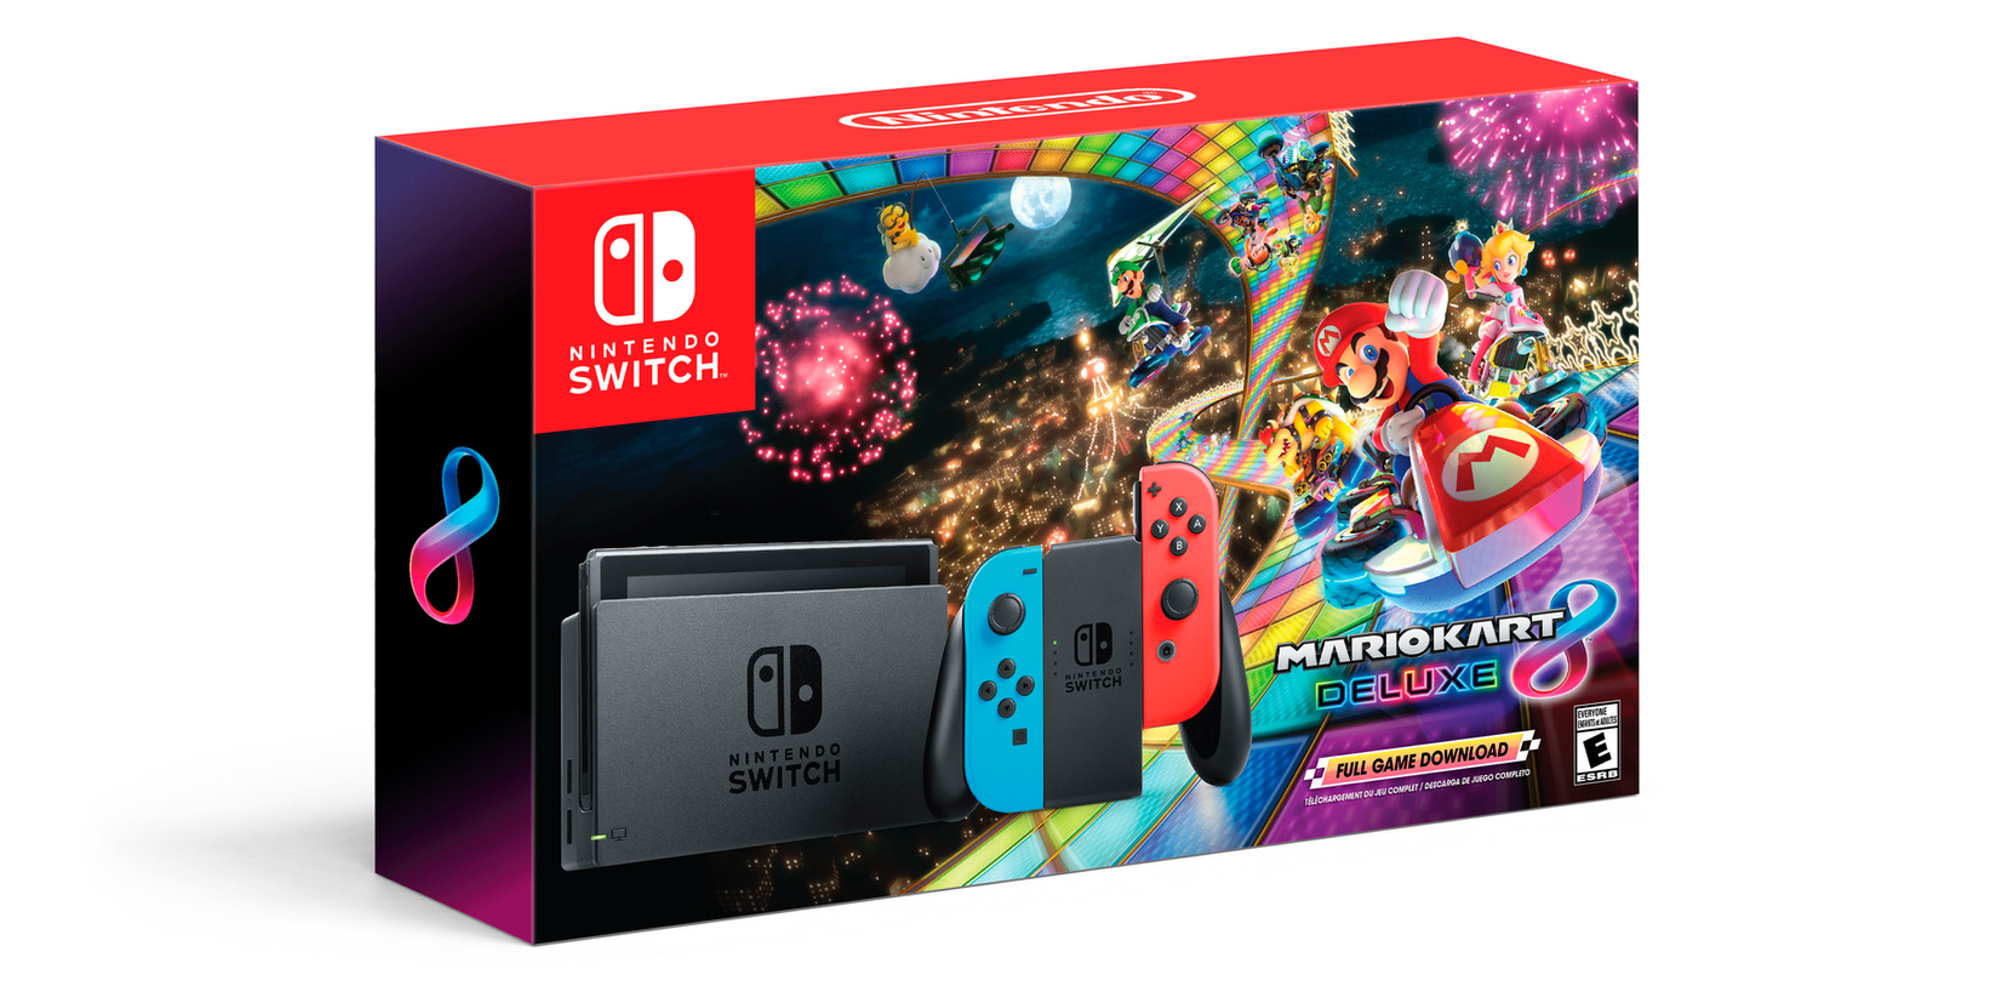 Nintendo Black Friday deals include console bundles for Switch & 2DS